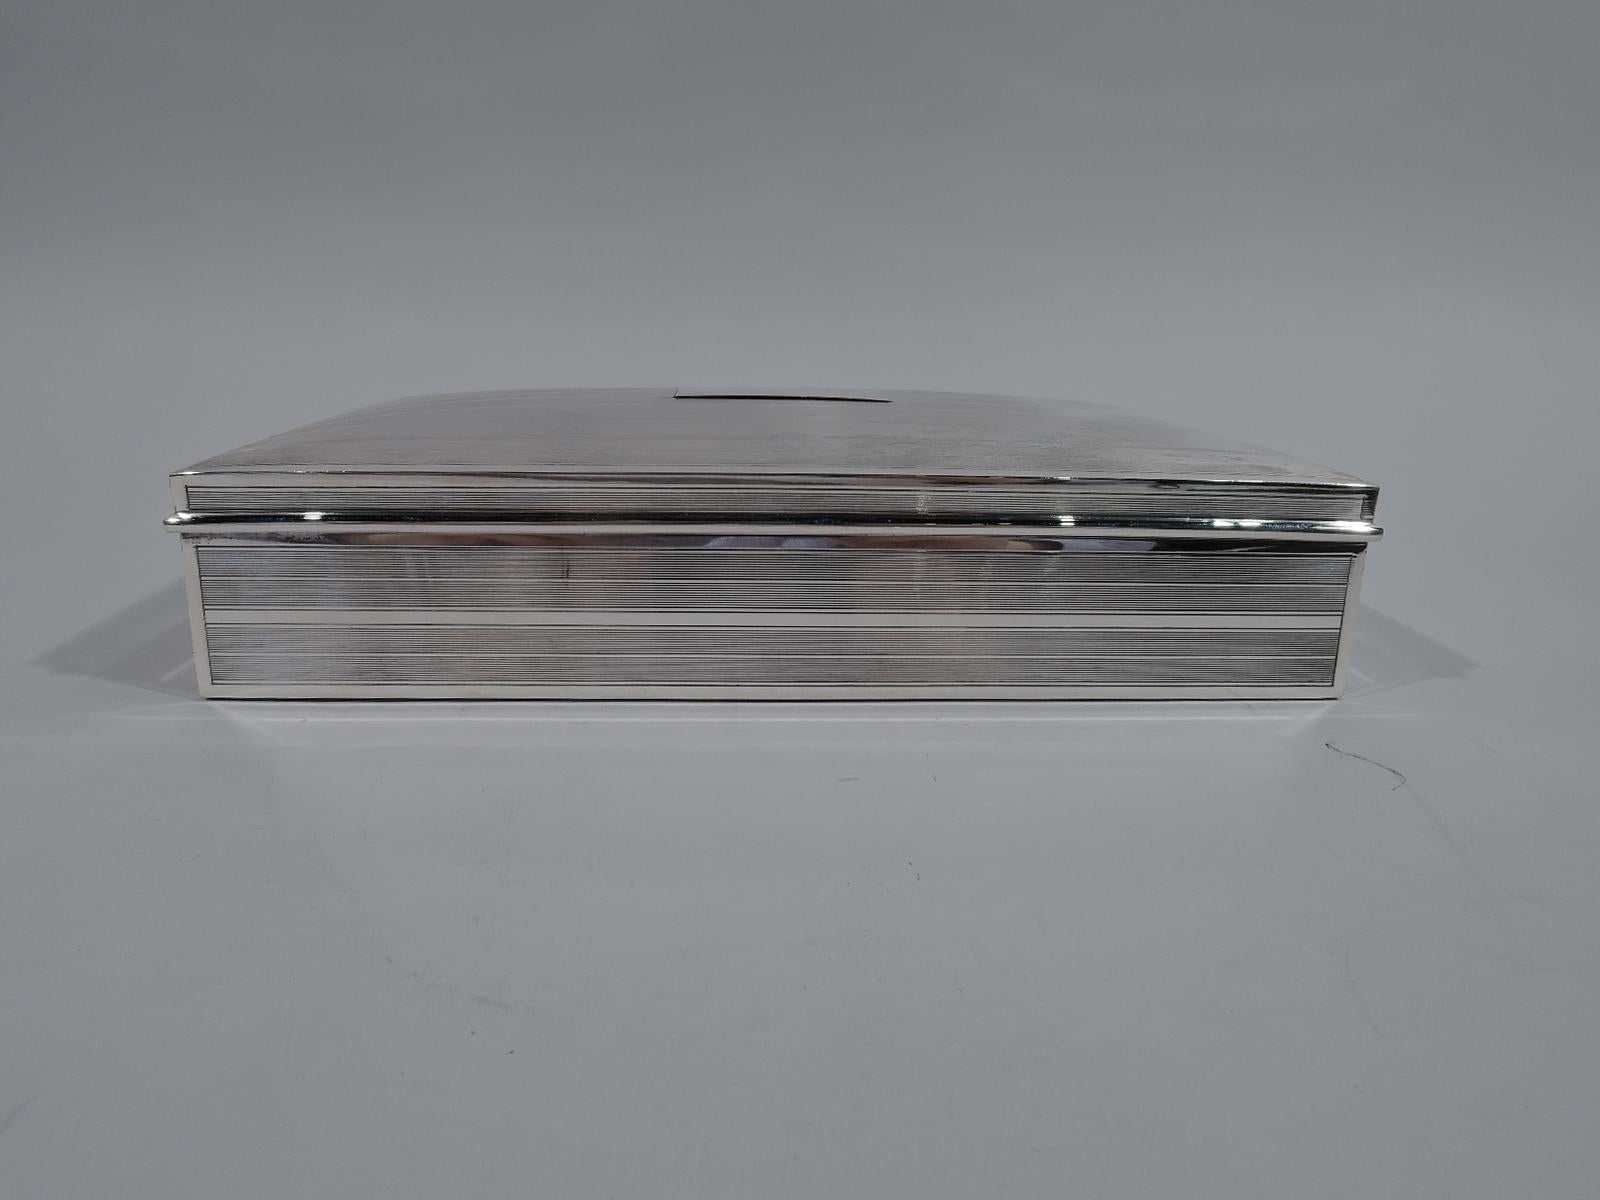 Large American Art Deco sterling silver box. Rectangular with straights dies, and curved and hinged cover. Engine-turned linear ornament on cover and sides: 2 groups of fine lines alternating with 1 wide plain line. Central rectangular mono plate